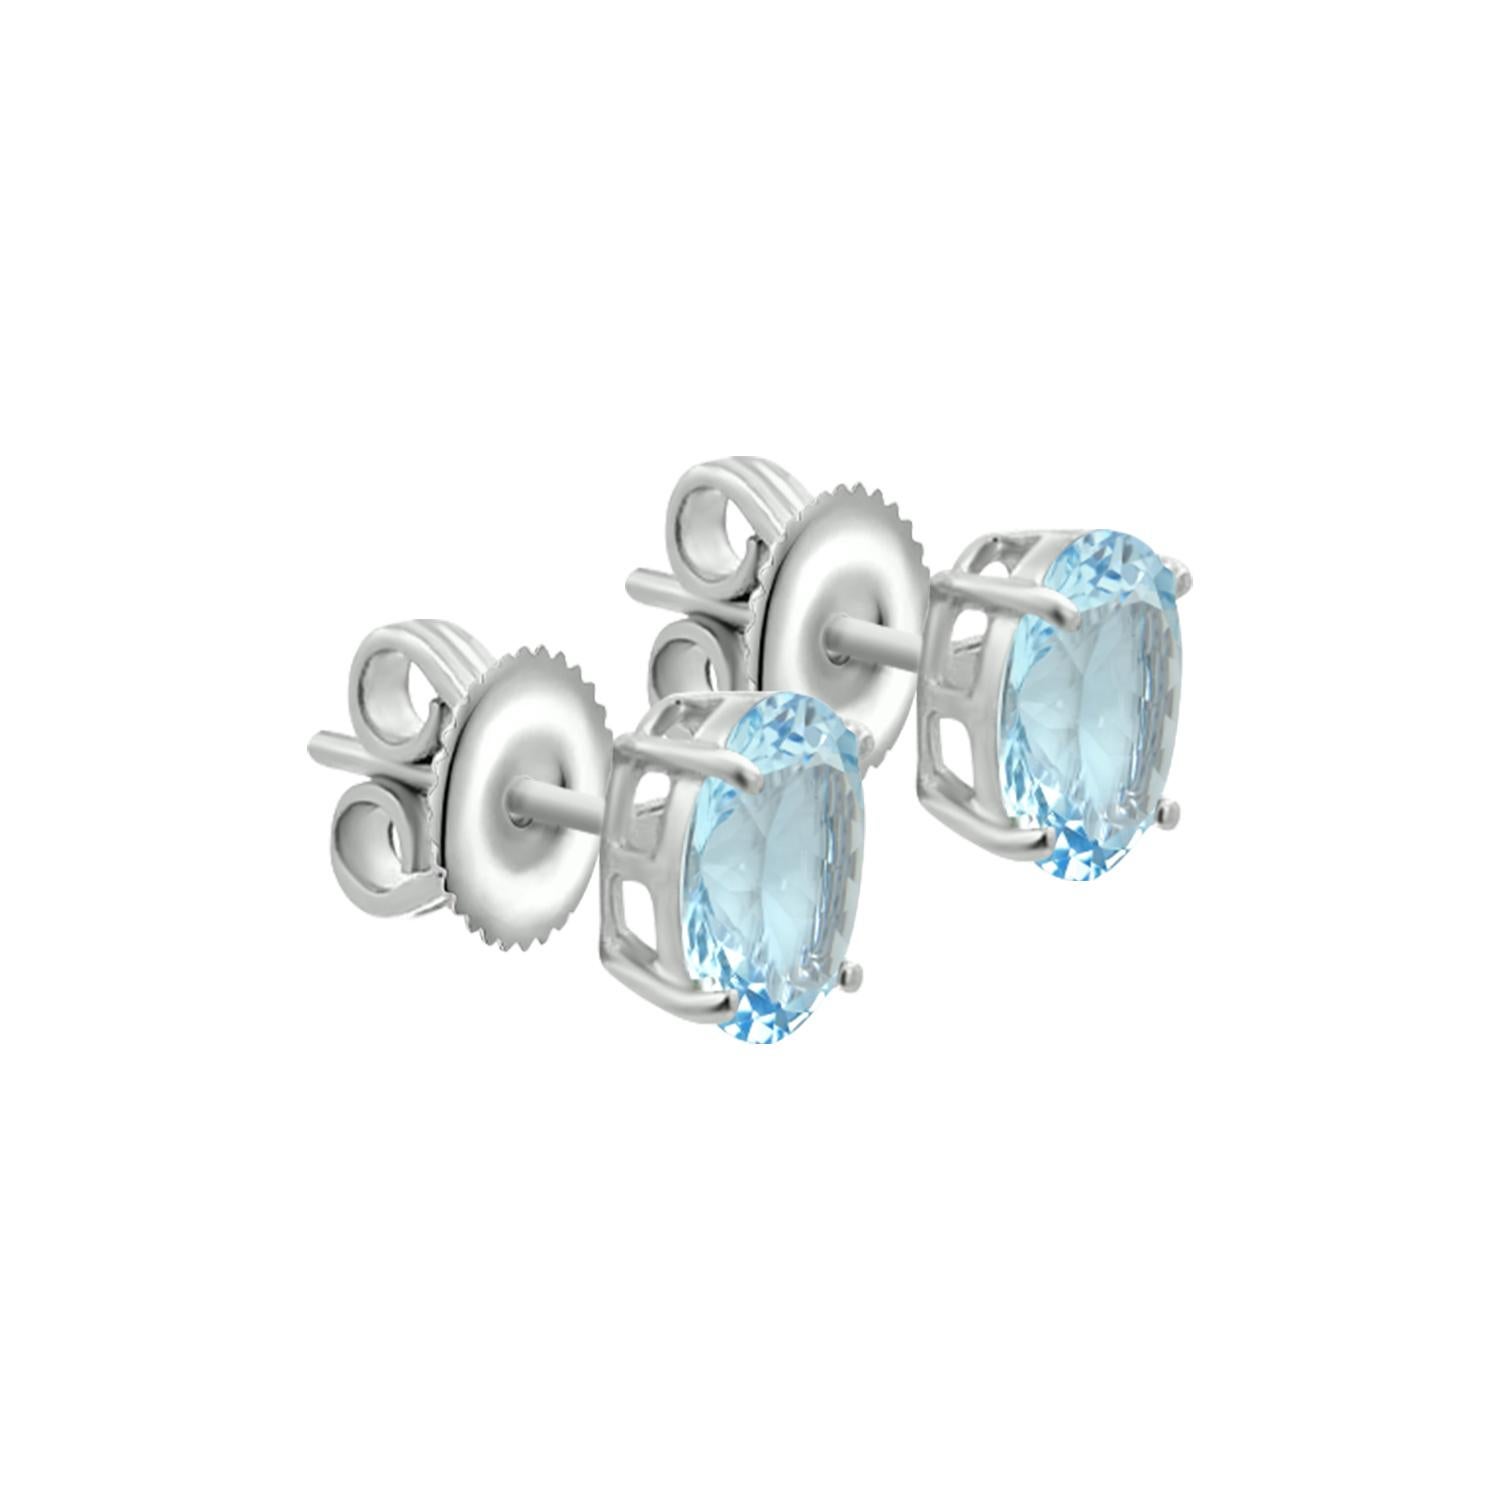 Make Sure Your Something  Blue Is Also Something Sparkly!
Beautiful Aquamarine Stud Earring Are A Classic Finish Touch For Traditional Brides. 
This Studs Earring Features Very Beautiful And Fine Quality 8x6mm Oval Shaped Aquamarine Gemstone Settled